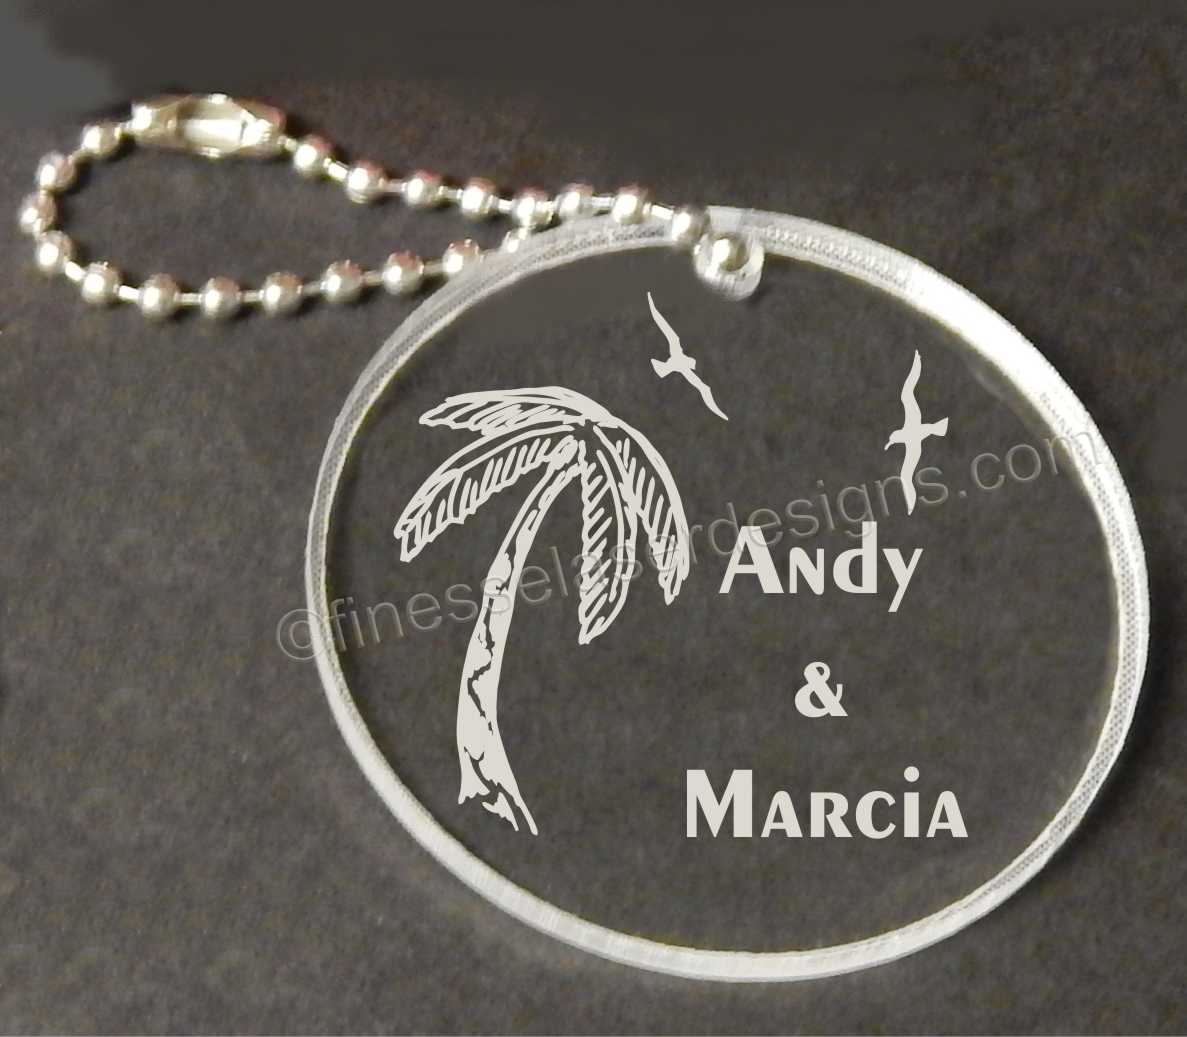 round acrylic keychain designed with palm tree, seagulls and names with a small metal chain attached